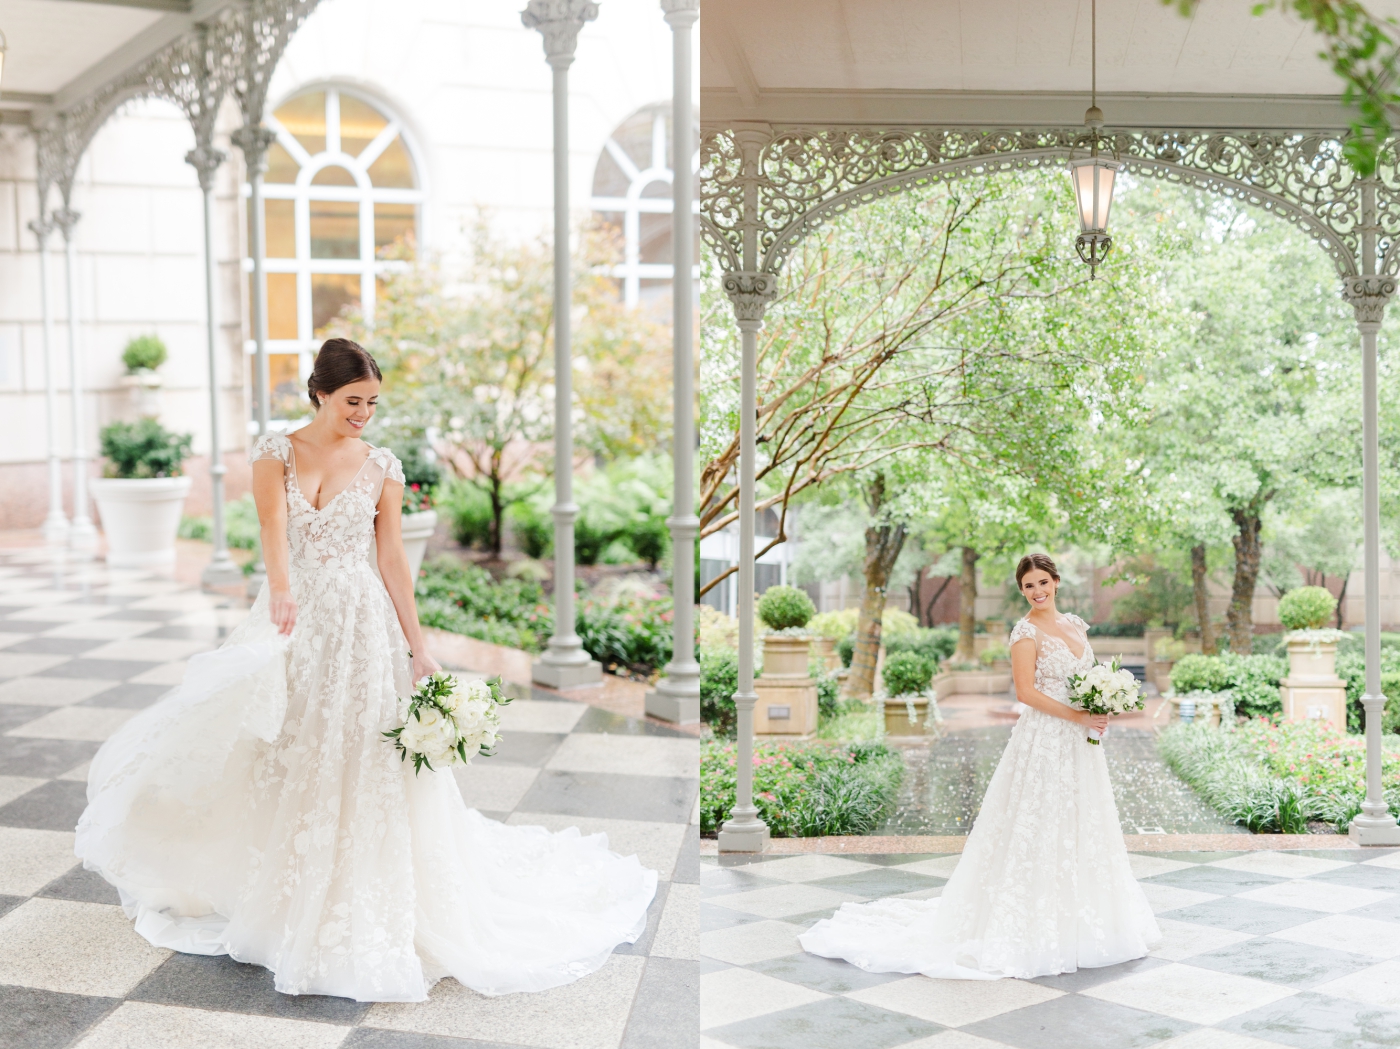 Bridal Session at Hotel Crescent Court